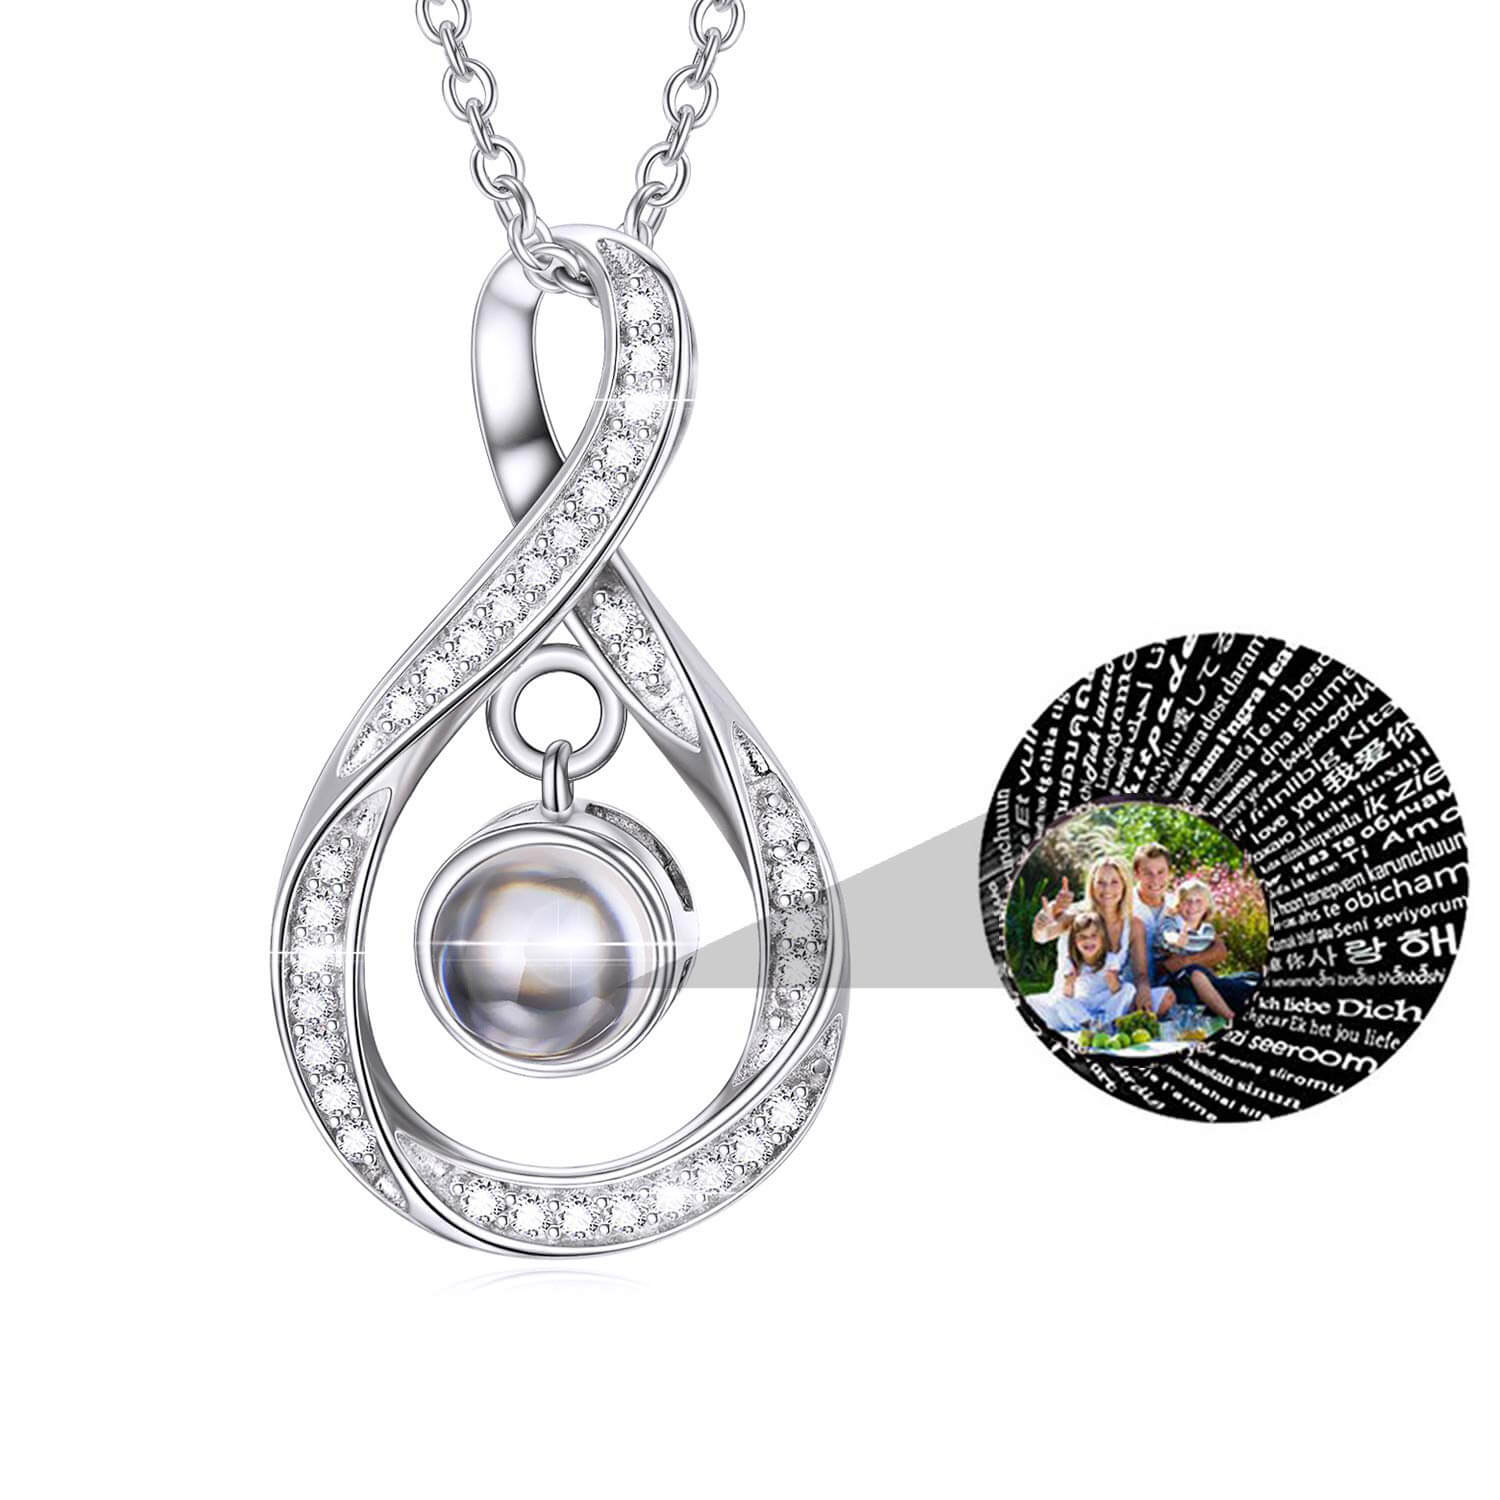 100 Languages "I Love You" With Color Photo Projection Necklace Infinity Personalized Photo Necklace